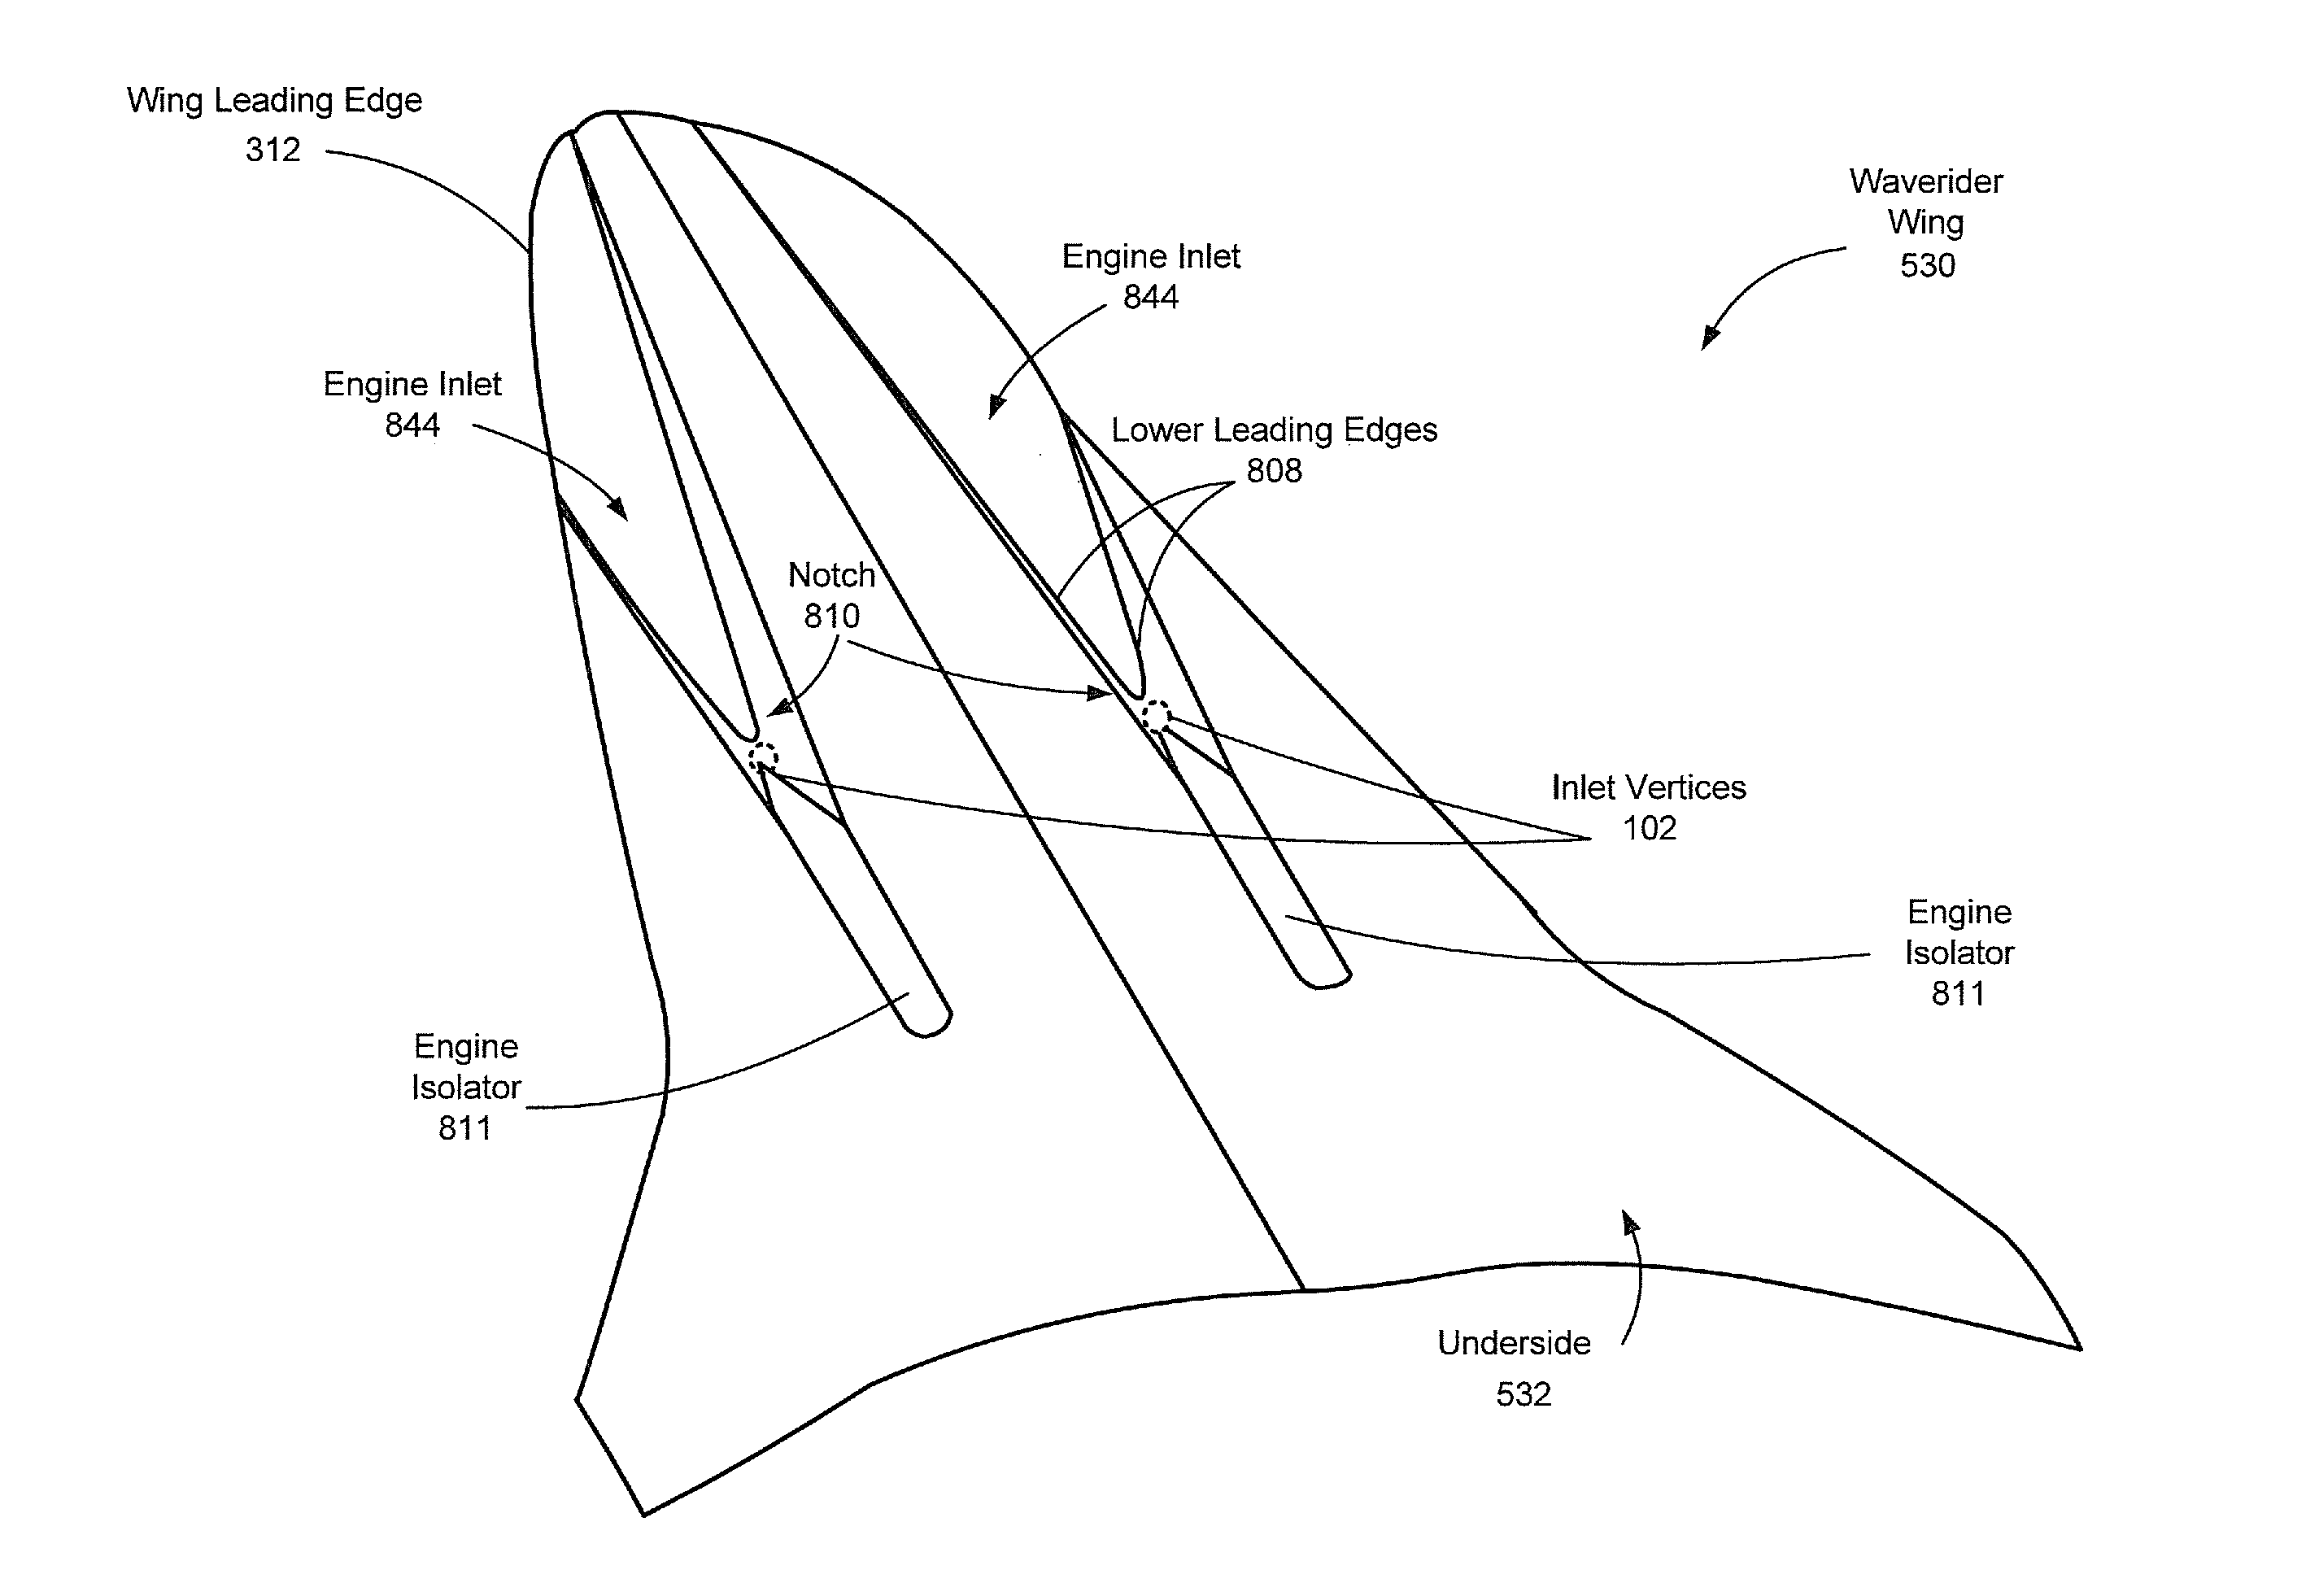 Integrated hypersonic inlet design